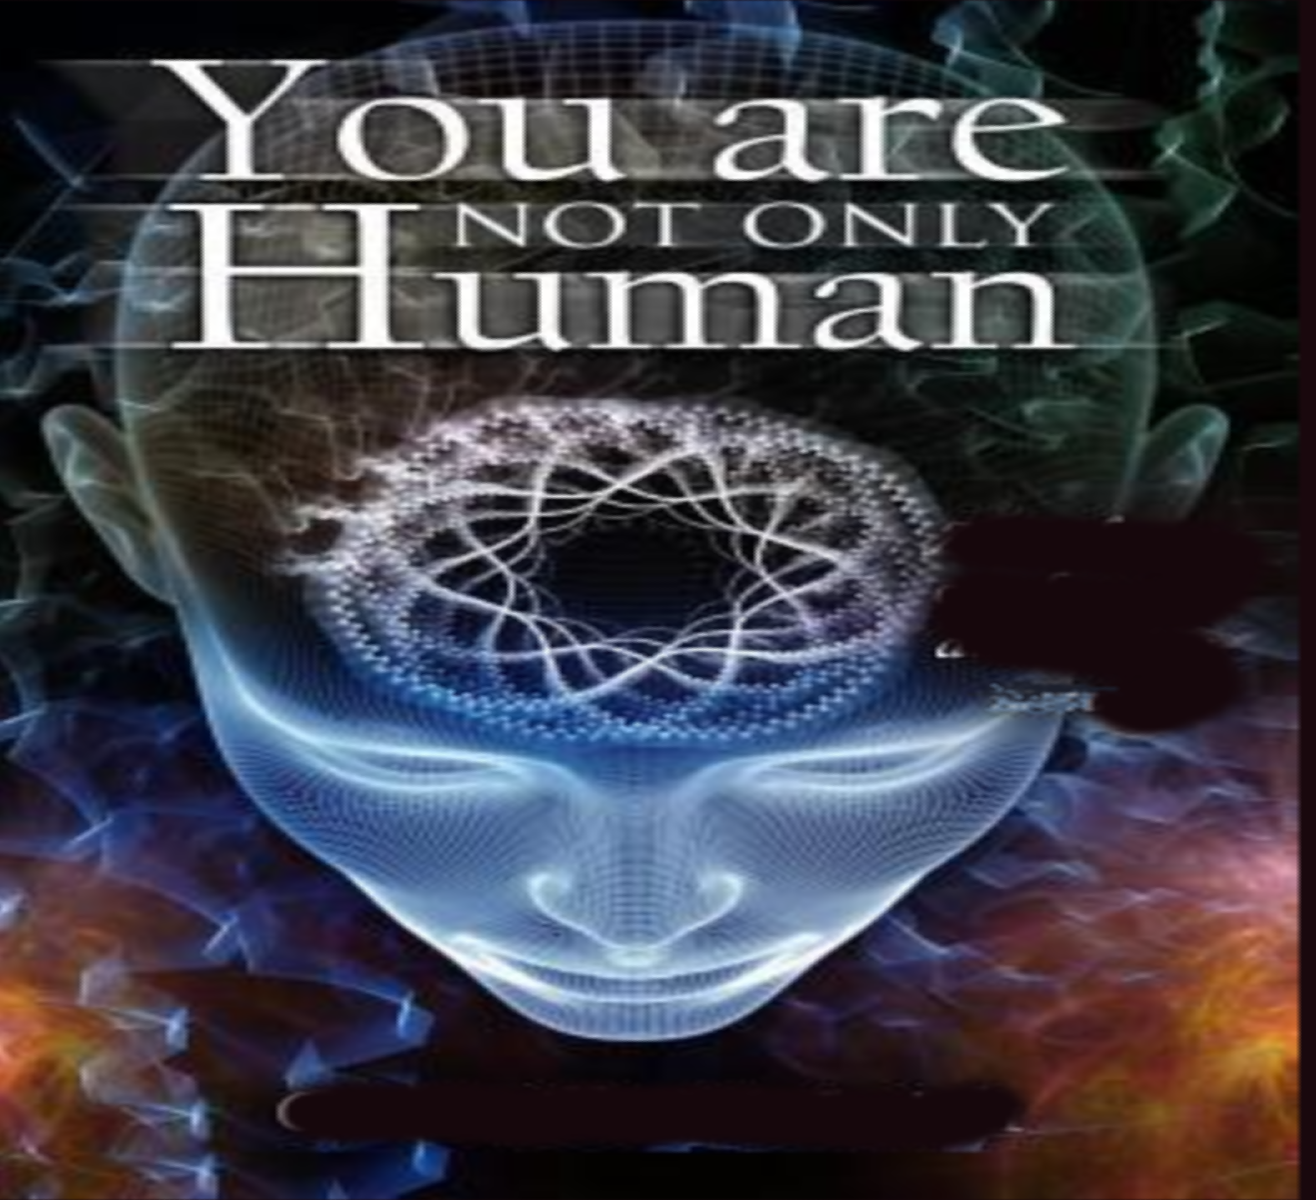 Thursday Bible Study: You are NOT only human